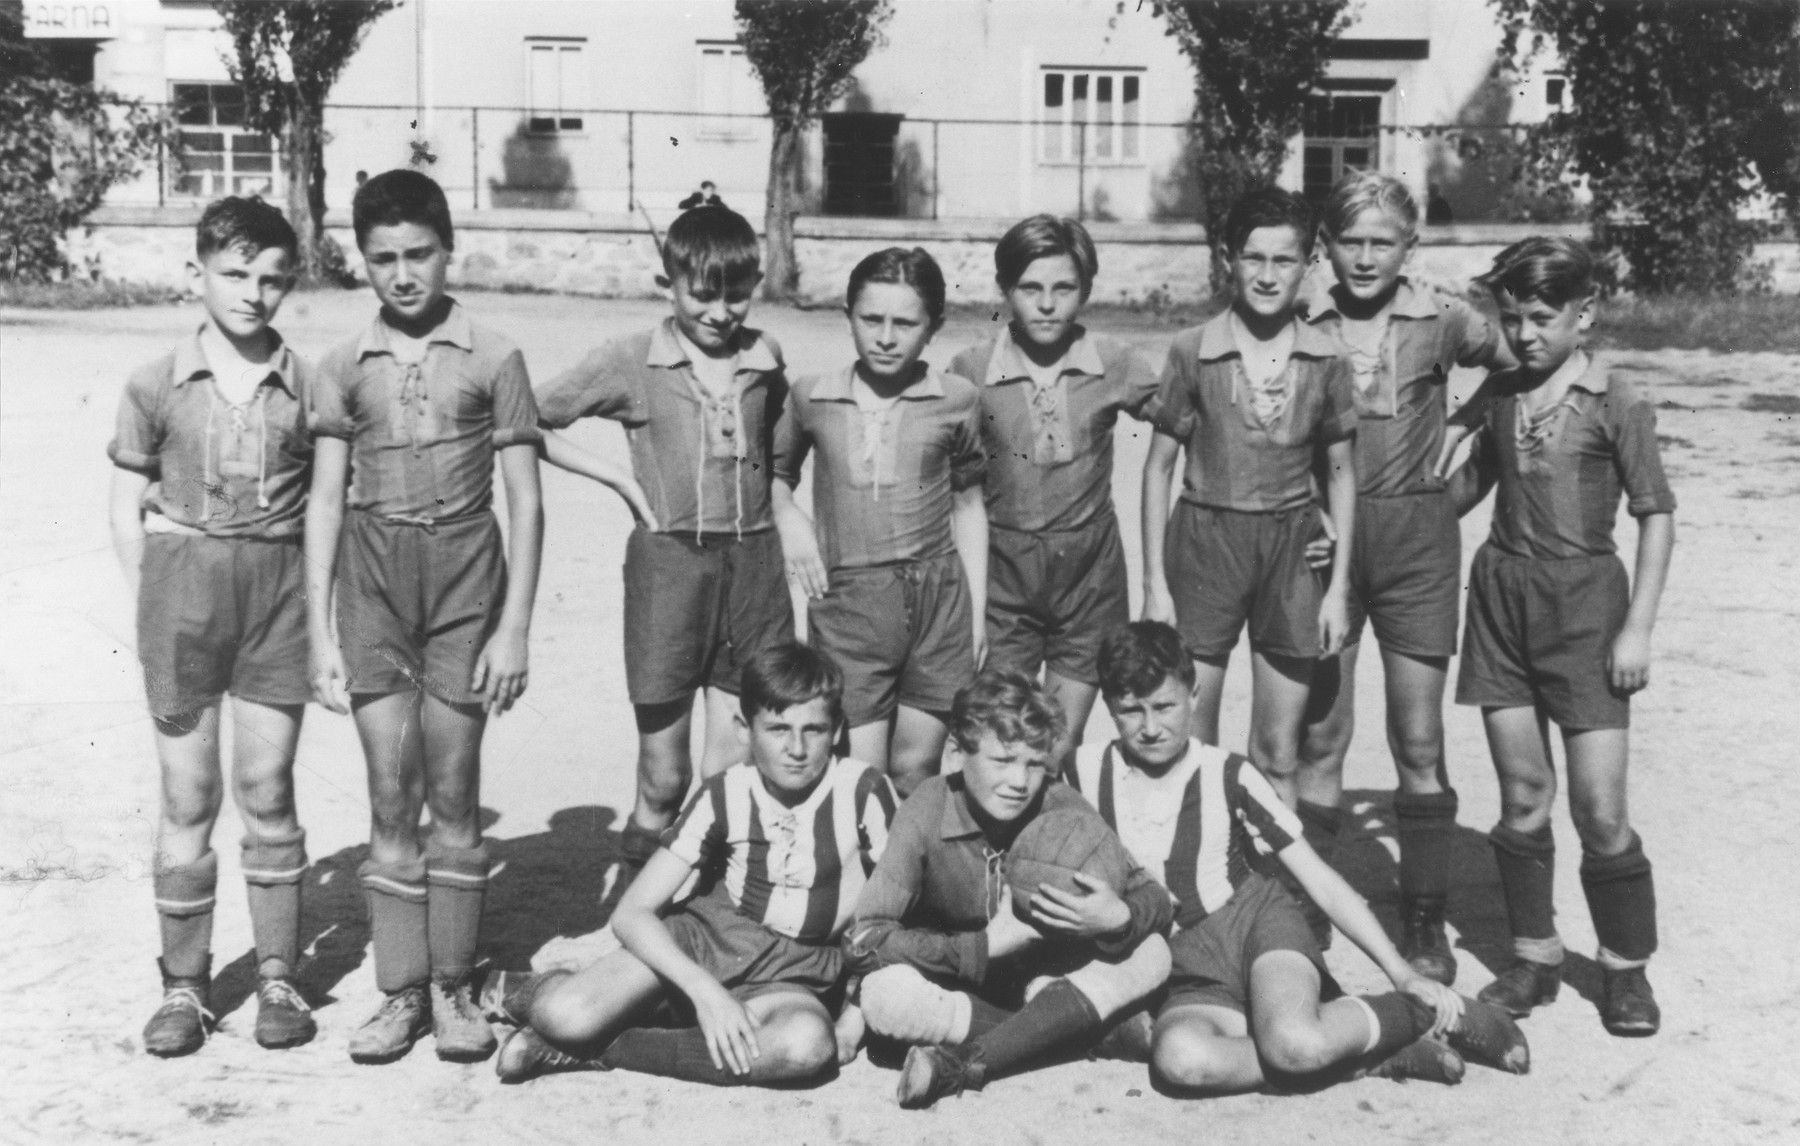 Bedrich Deutsch (standing second from the left) poses with the other members of a soccer team in Znojmo, Moravia.  He is the only Jew in the group.